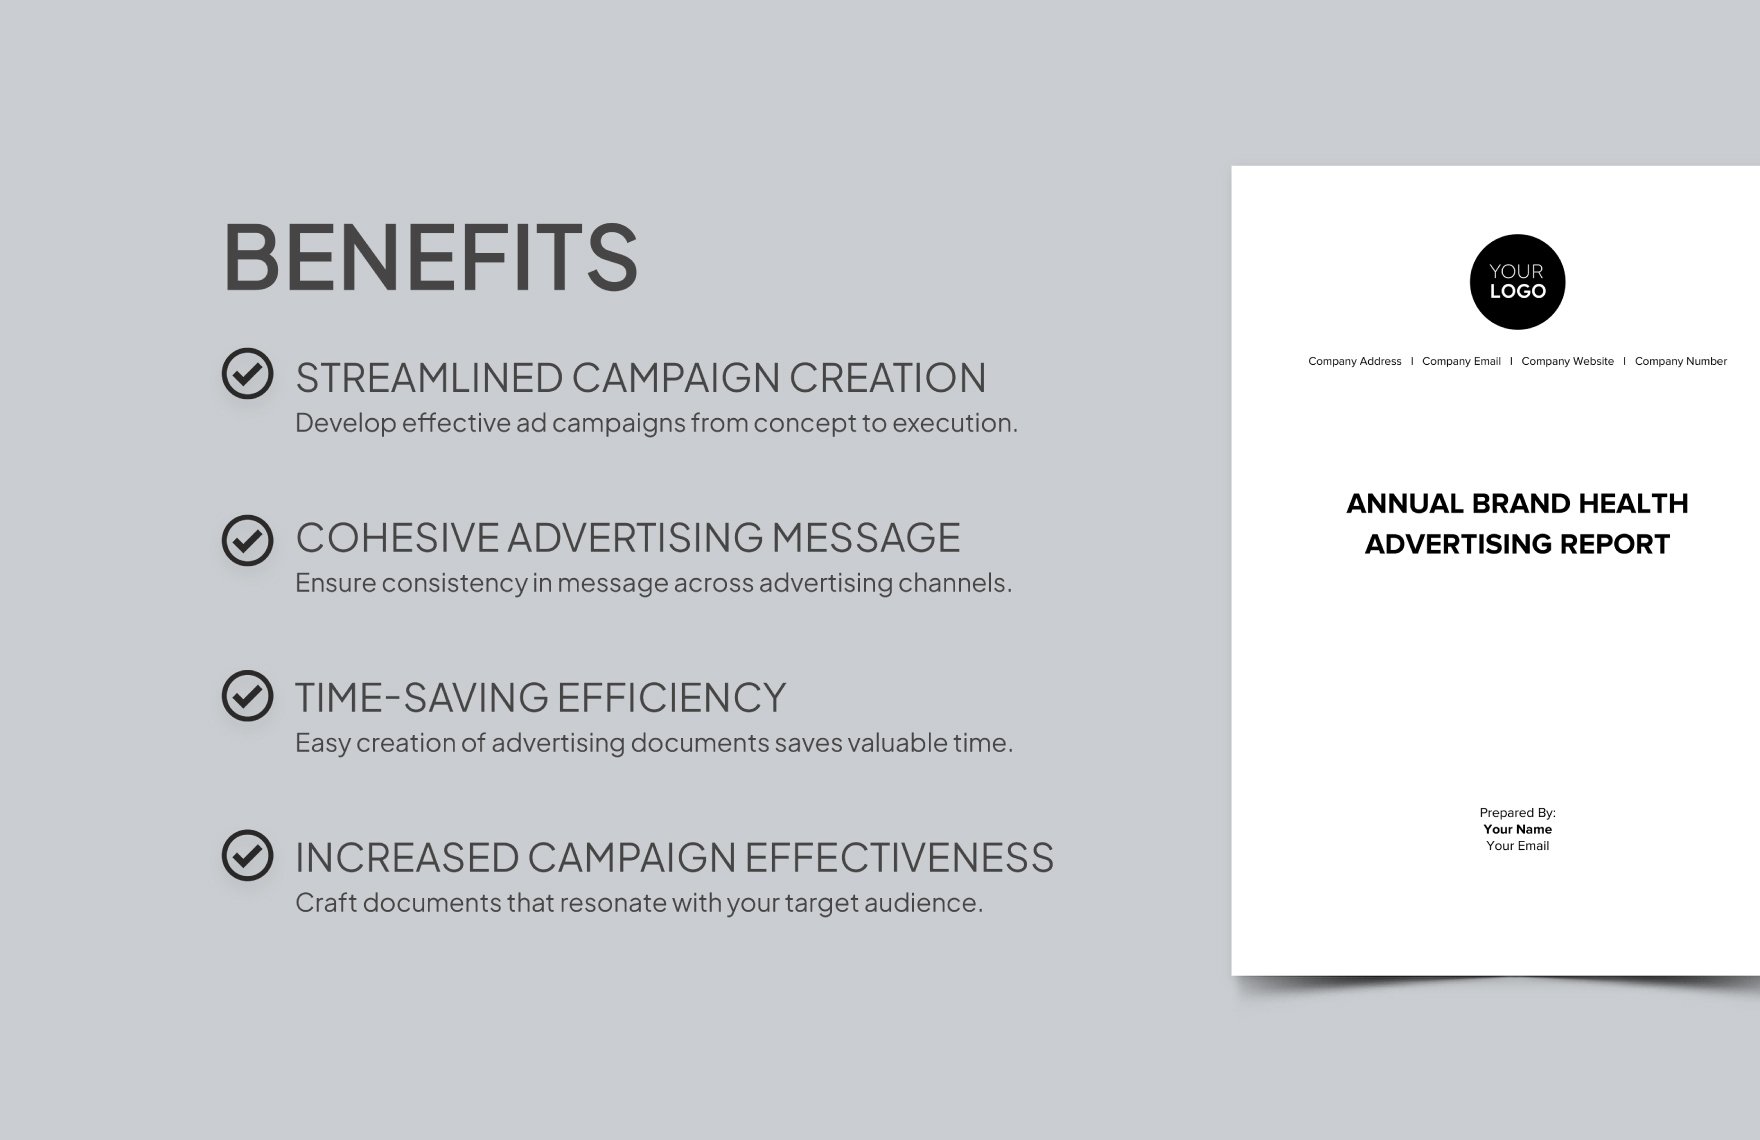 Annual Brand Health Advertising Report Template